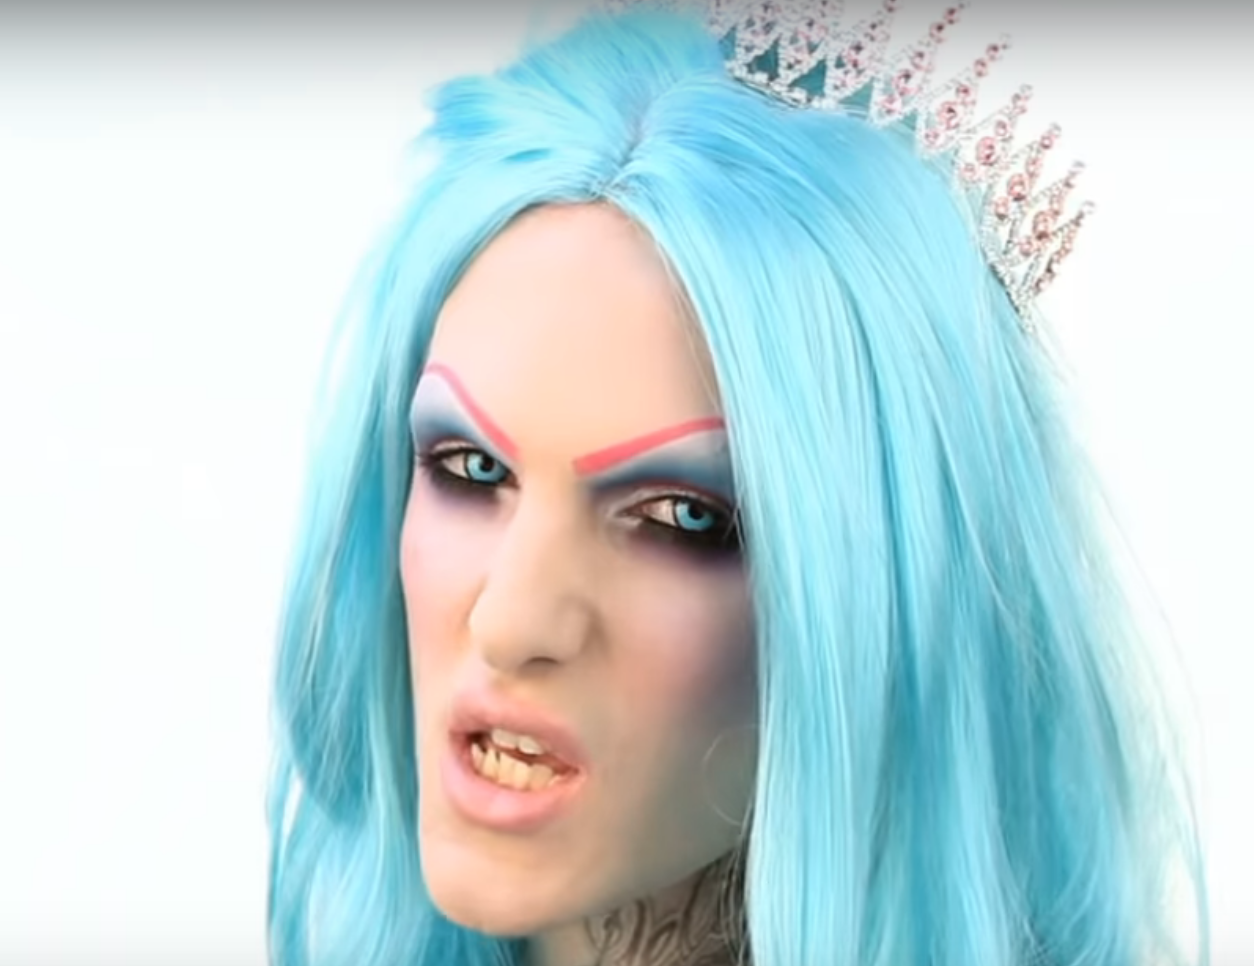 jeffree star with his old teeth.